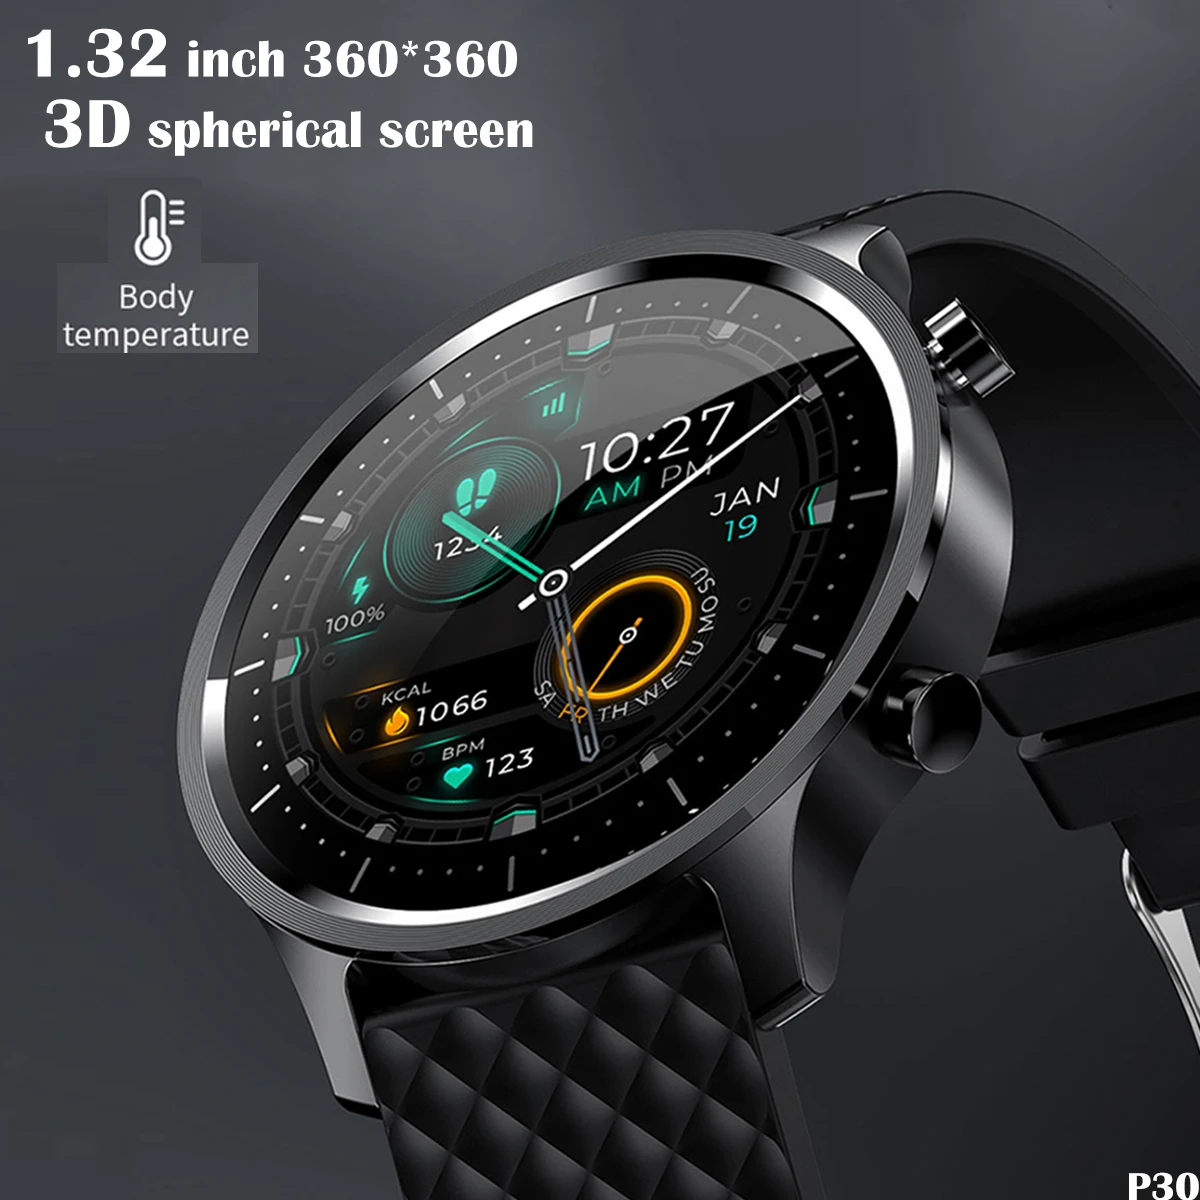 2021 P30  NEW Smart Watch Men 3D Spherical Full Touch Screen Fitness Watches For Men Temperature Heart Rate Monitor Android ios